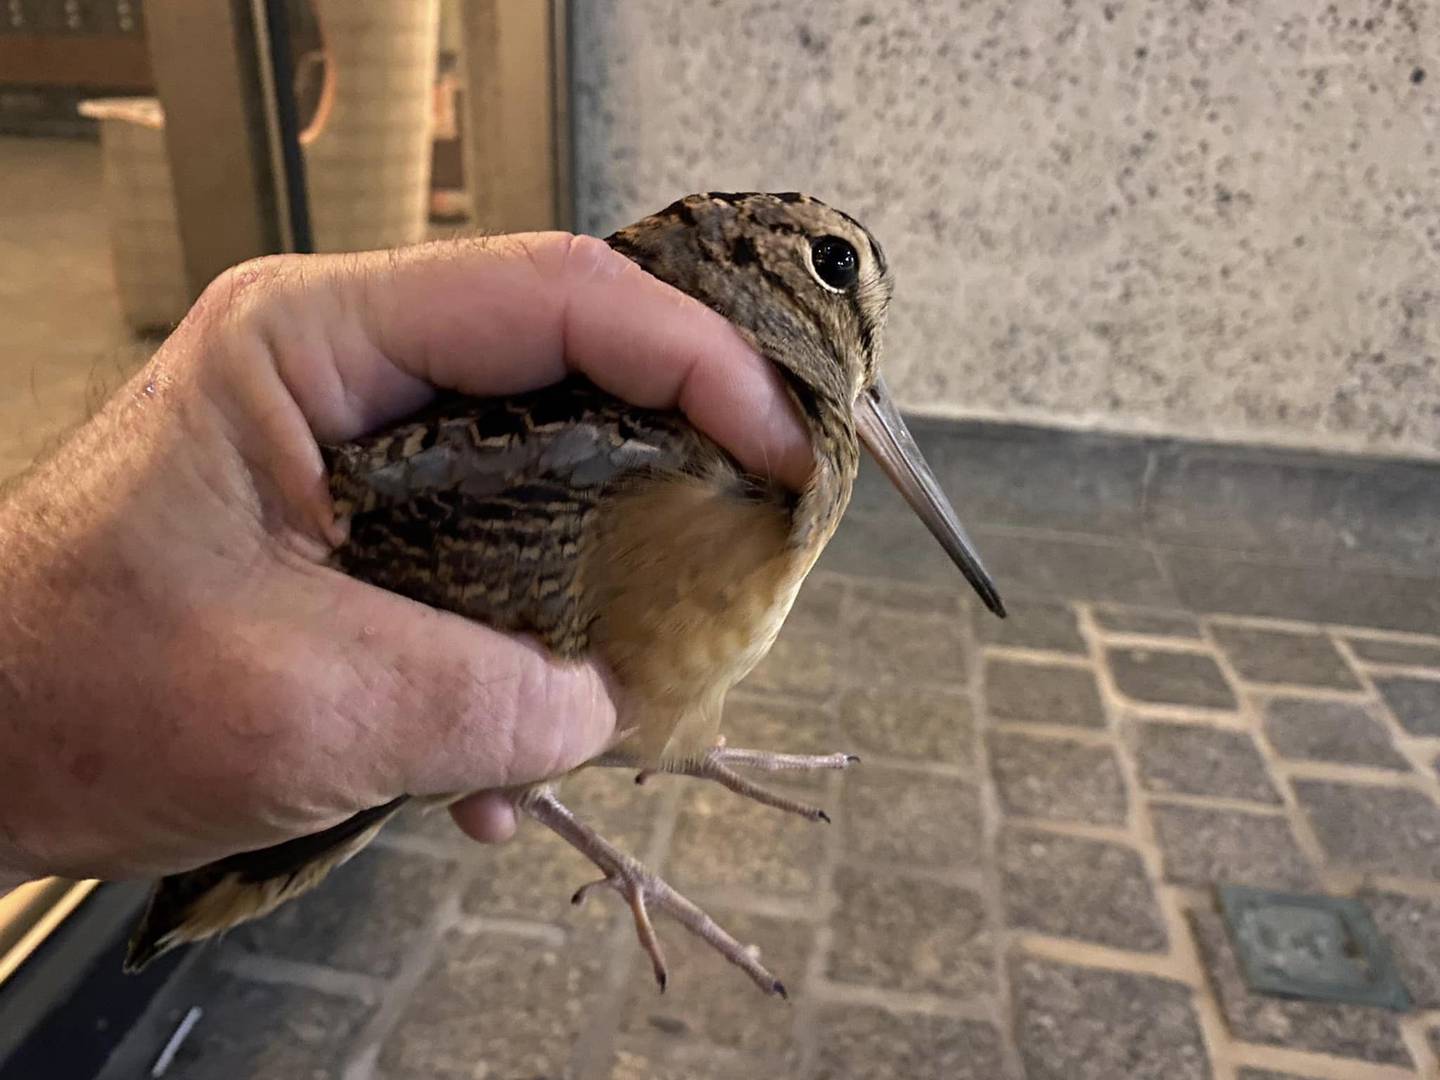 An American woodcock being held in a person's hand